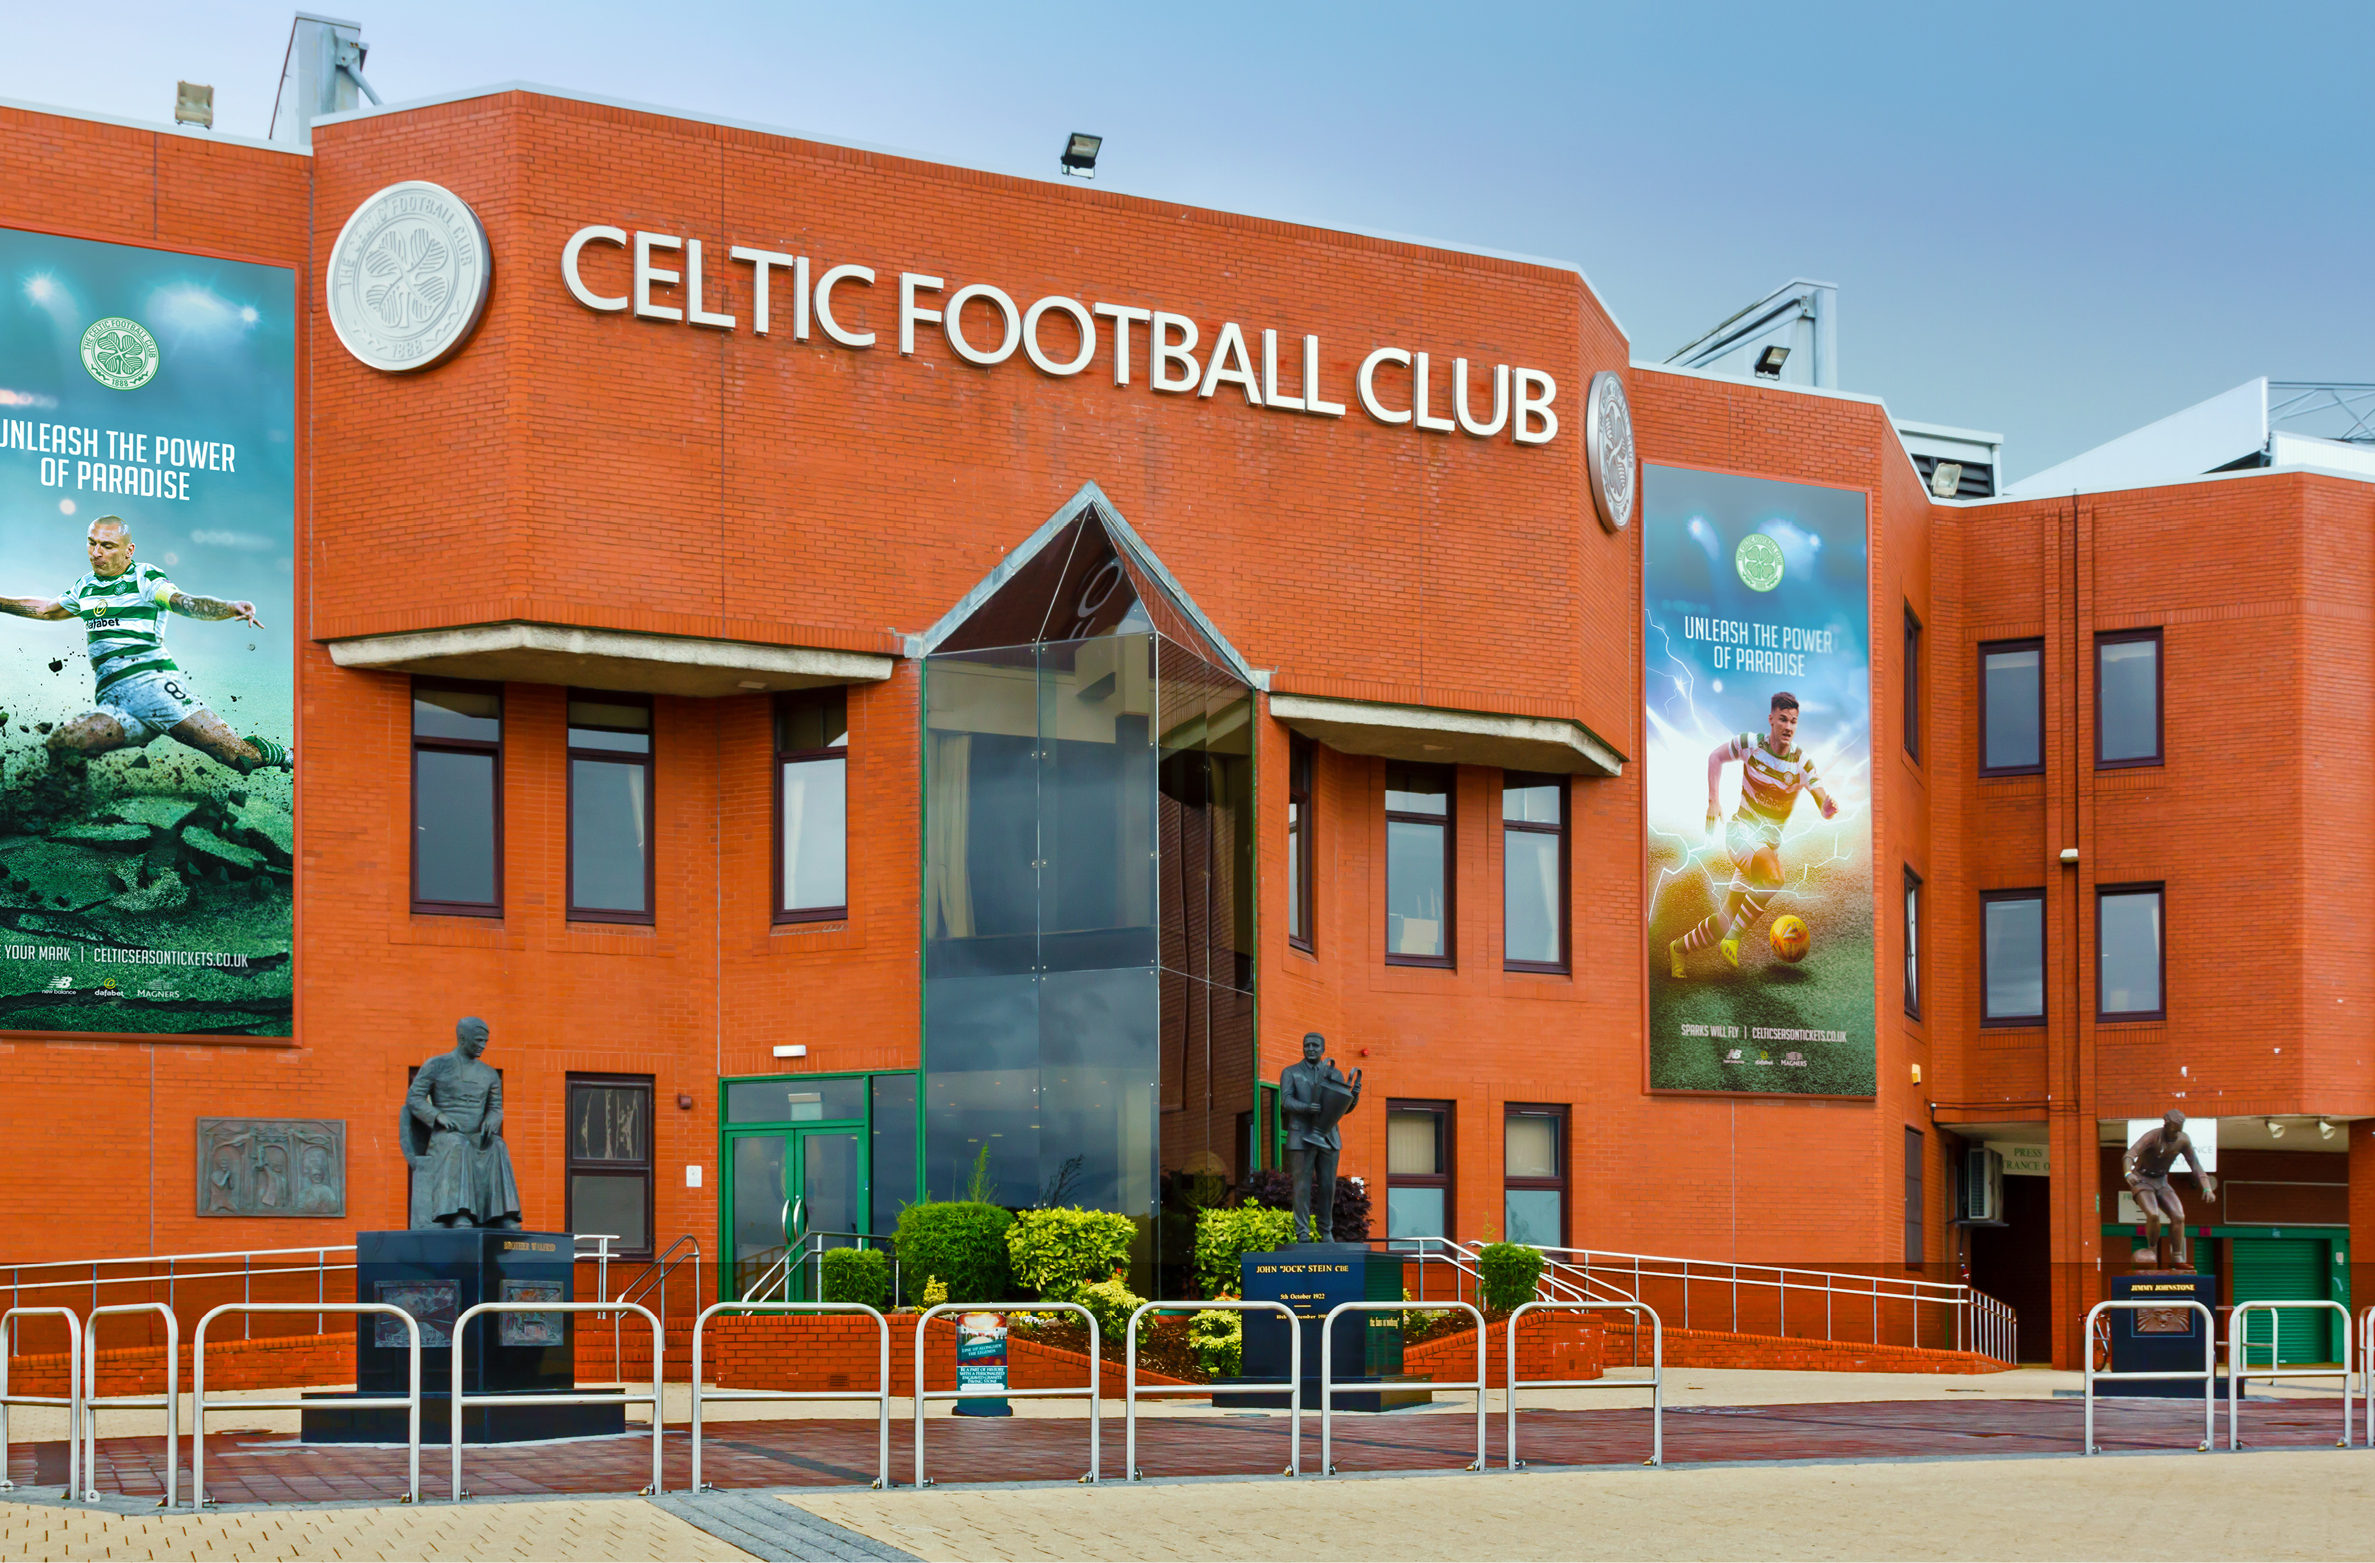 Celtic 'Power of Paradise' Campaign by Maguires